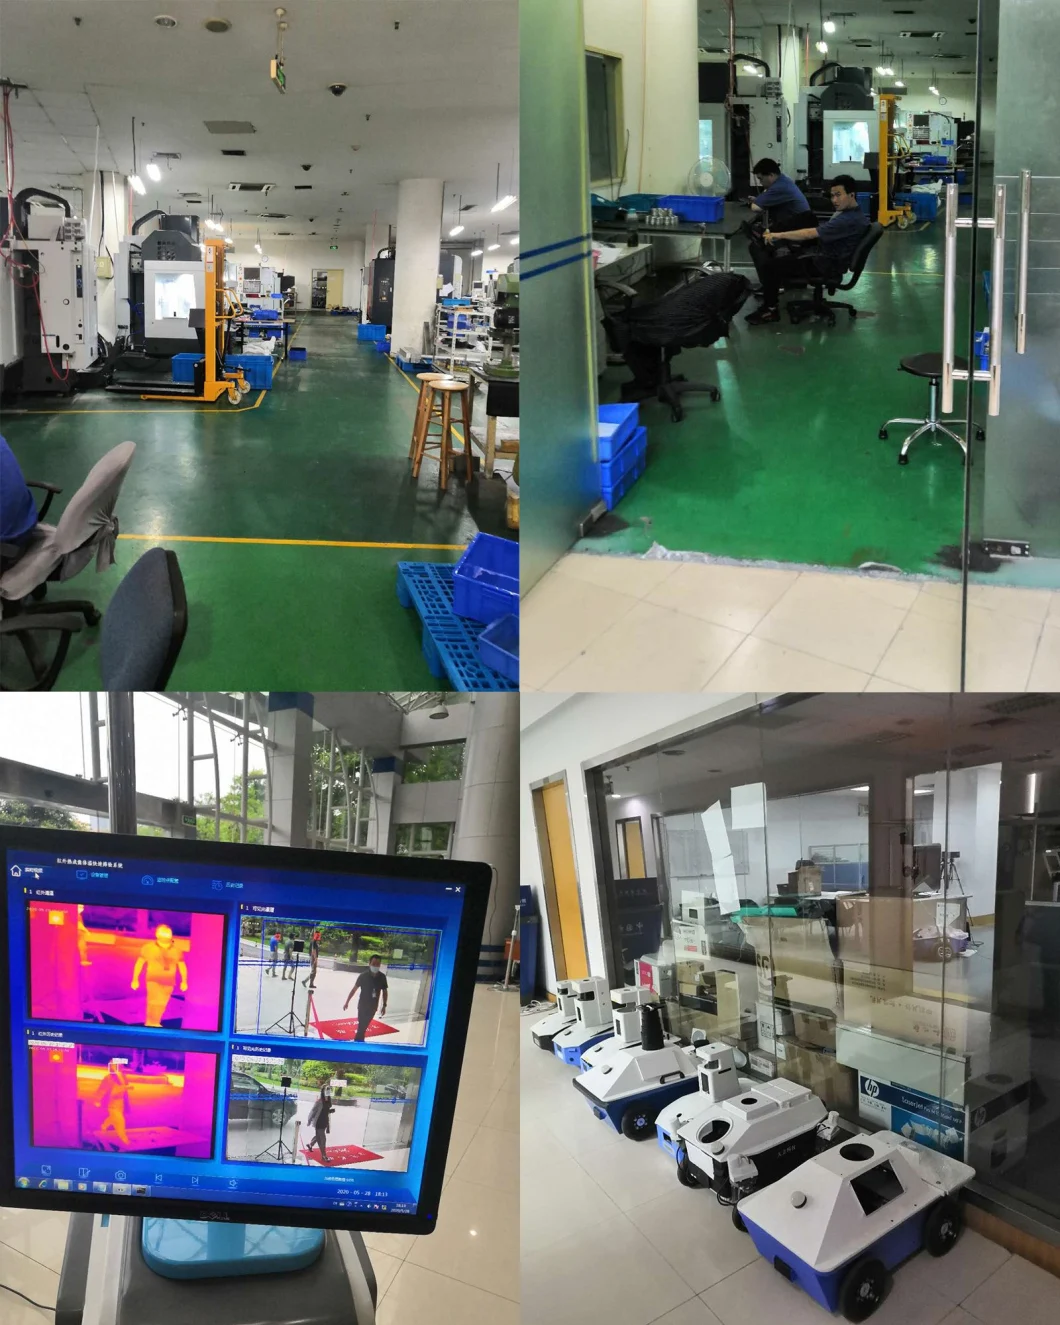 Abnormal Face Automatic Recognition Infrared System Infrared Thermal Imager Thermal Imaging Sensor School Airport Sk-256dt